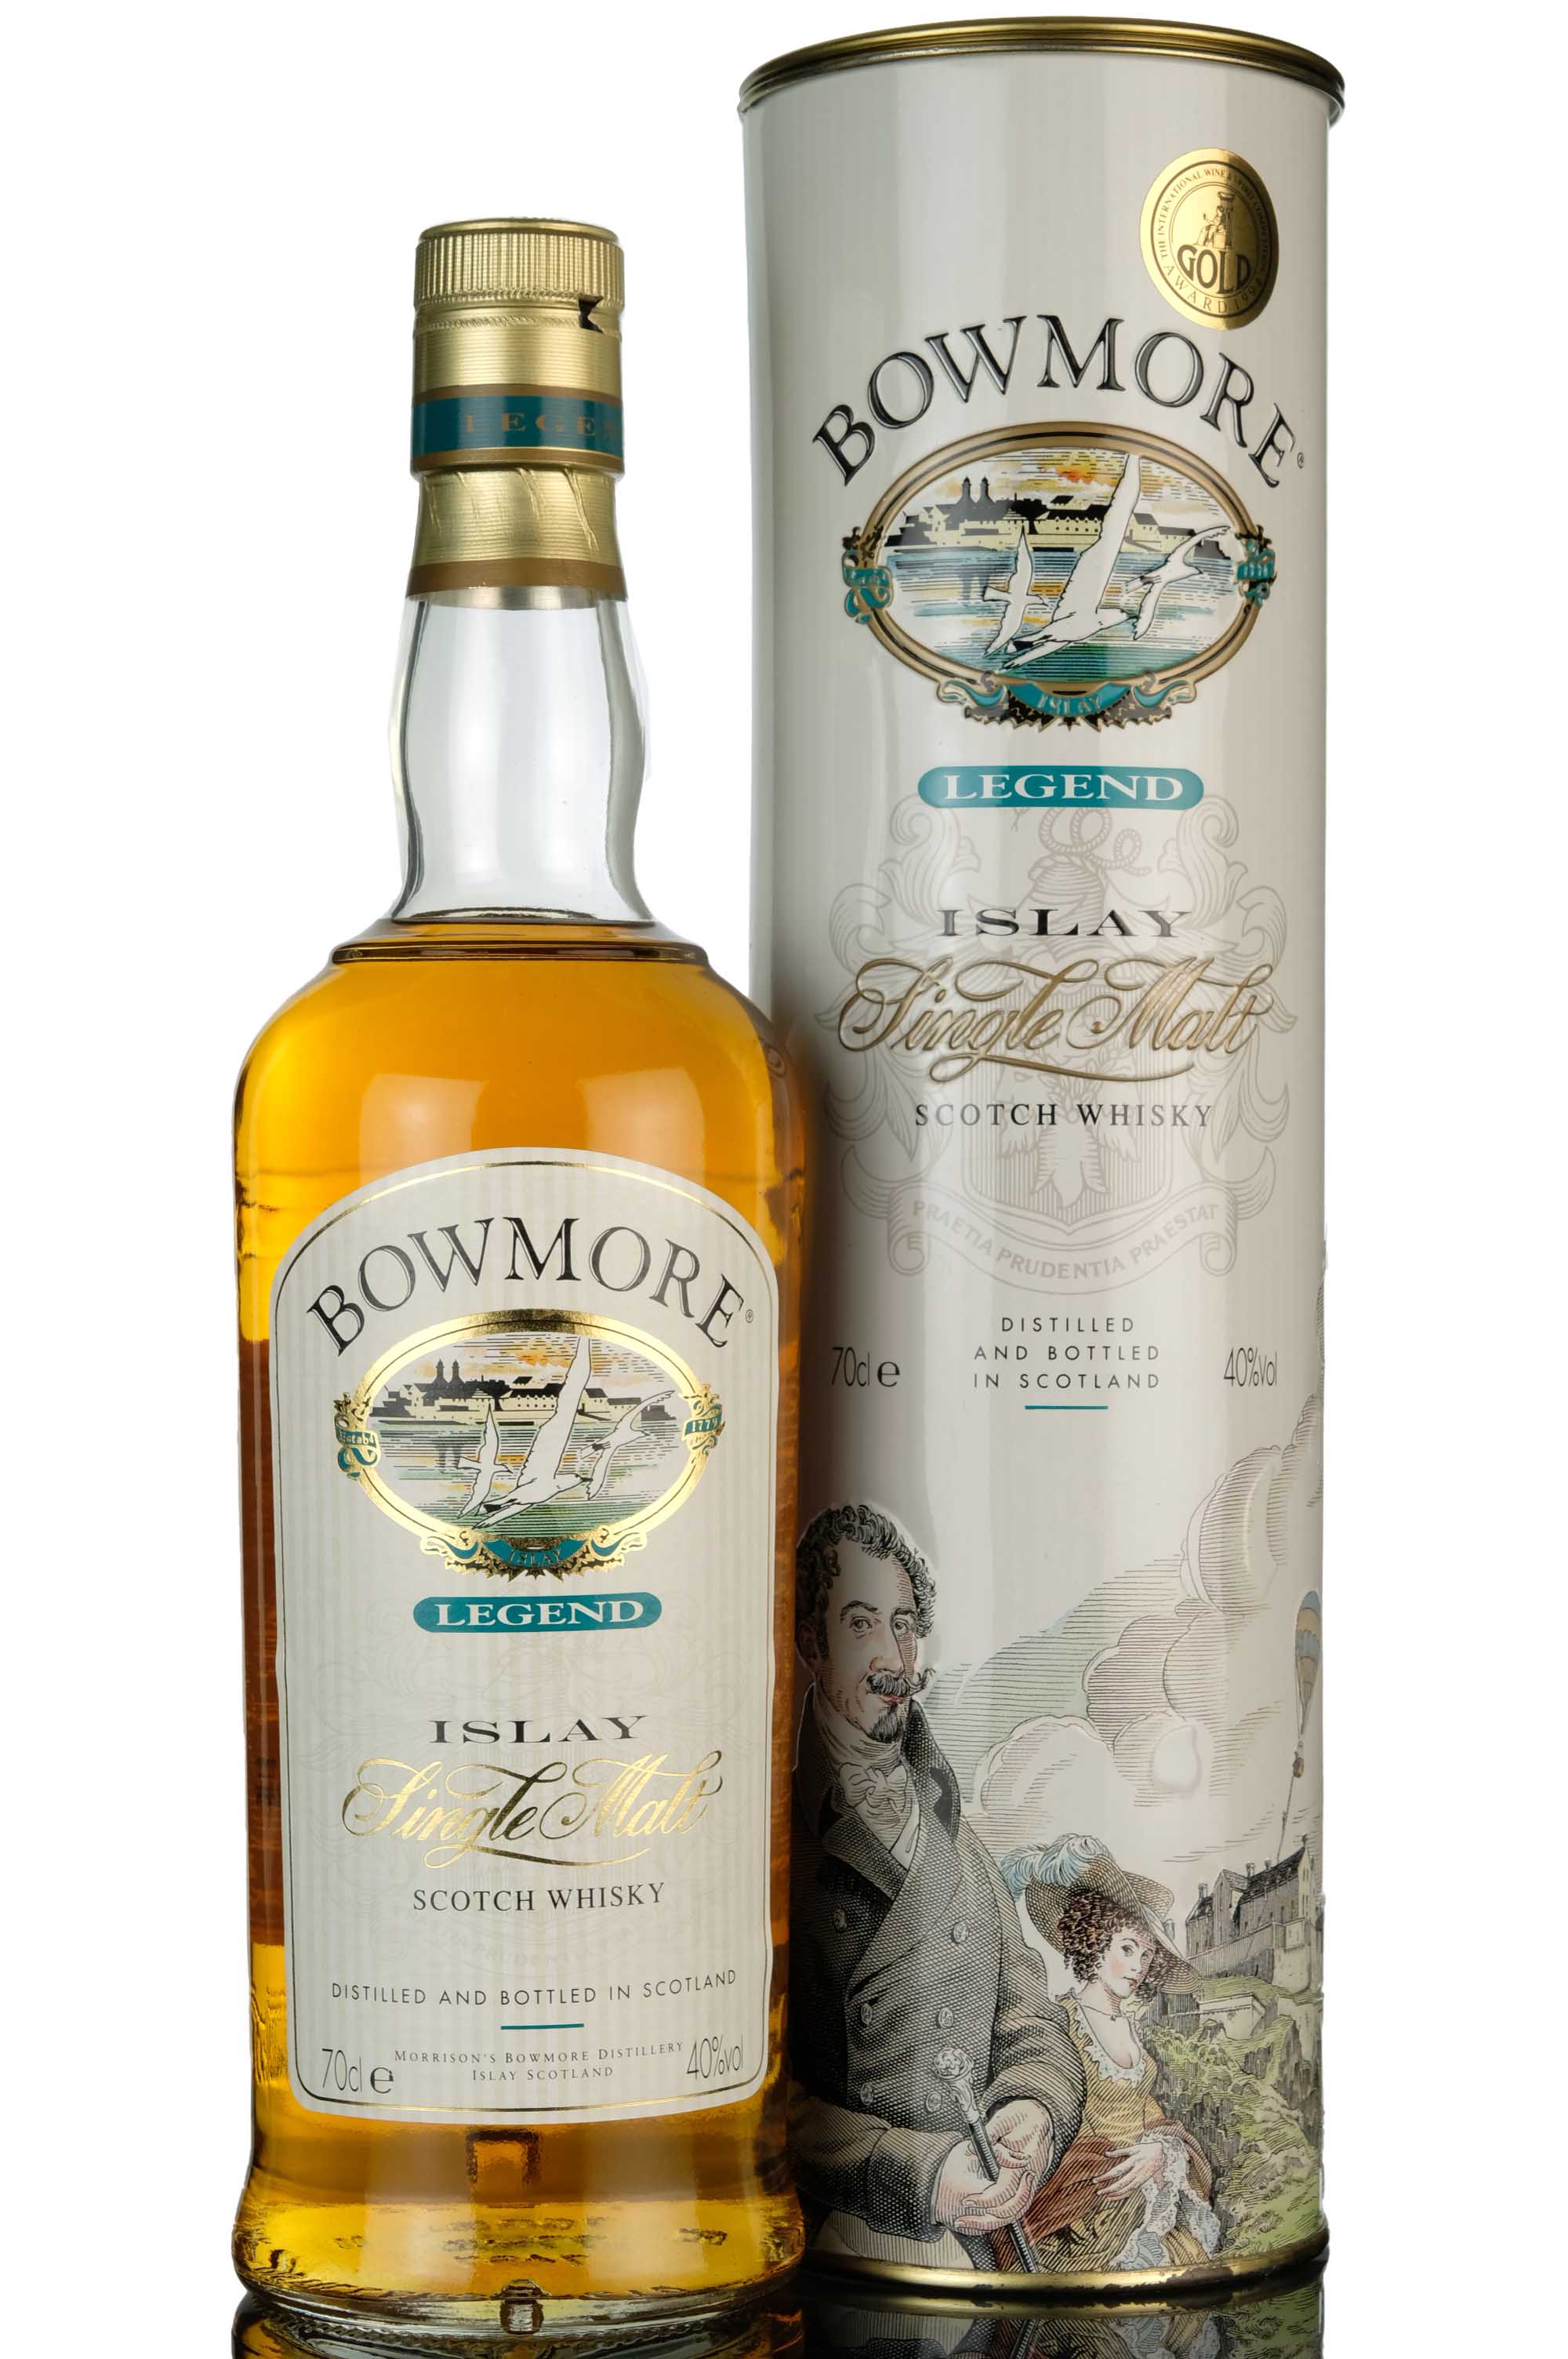 Bowmore Legend - St Ives - 1994 Release - 1st Edition